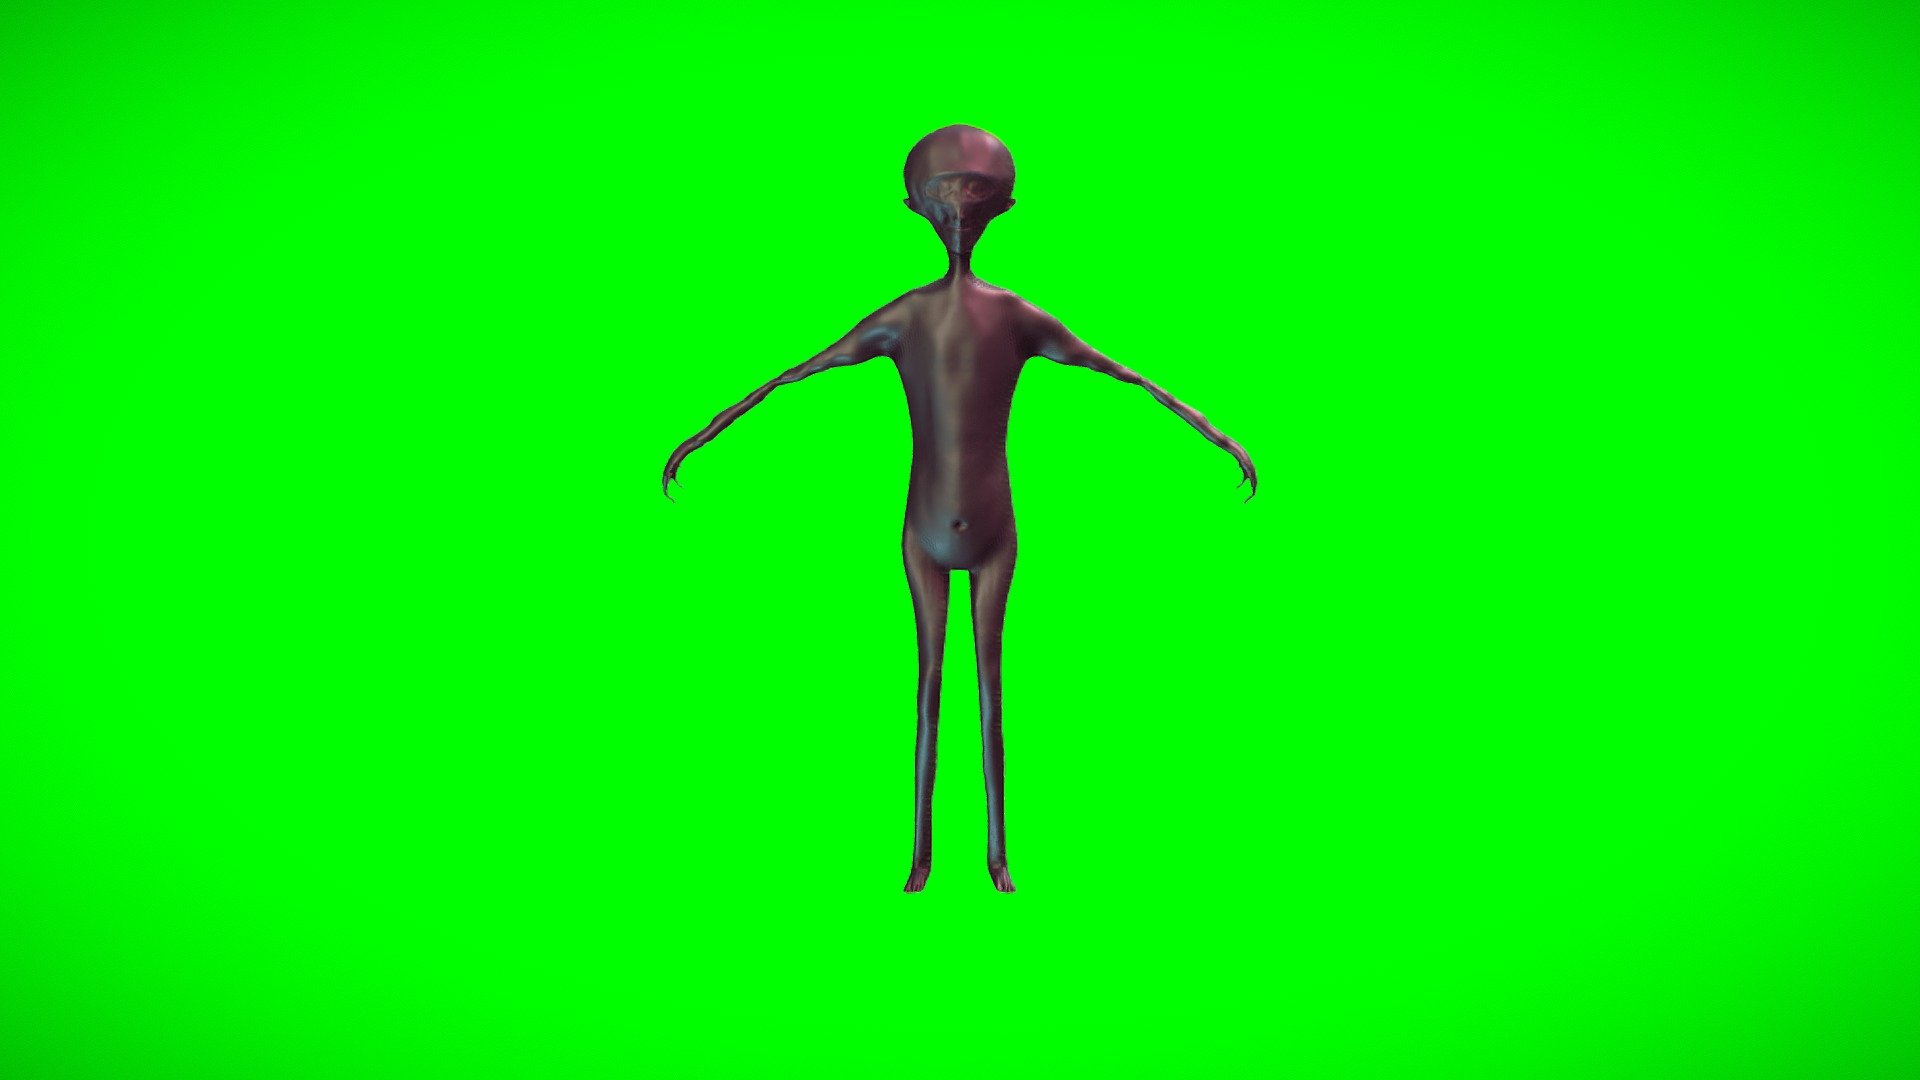 this was recreated
heres the original
https://sketchfab.com/models/7c9e8675065d41dcbe2e2207e95ad616 - Howard the Alien - Download Free 3D model by timeforrick 3d model